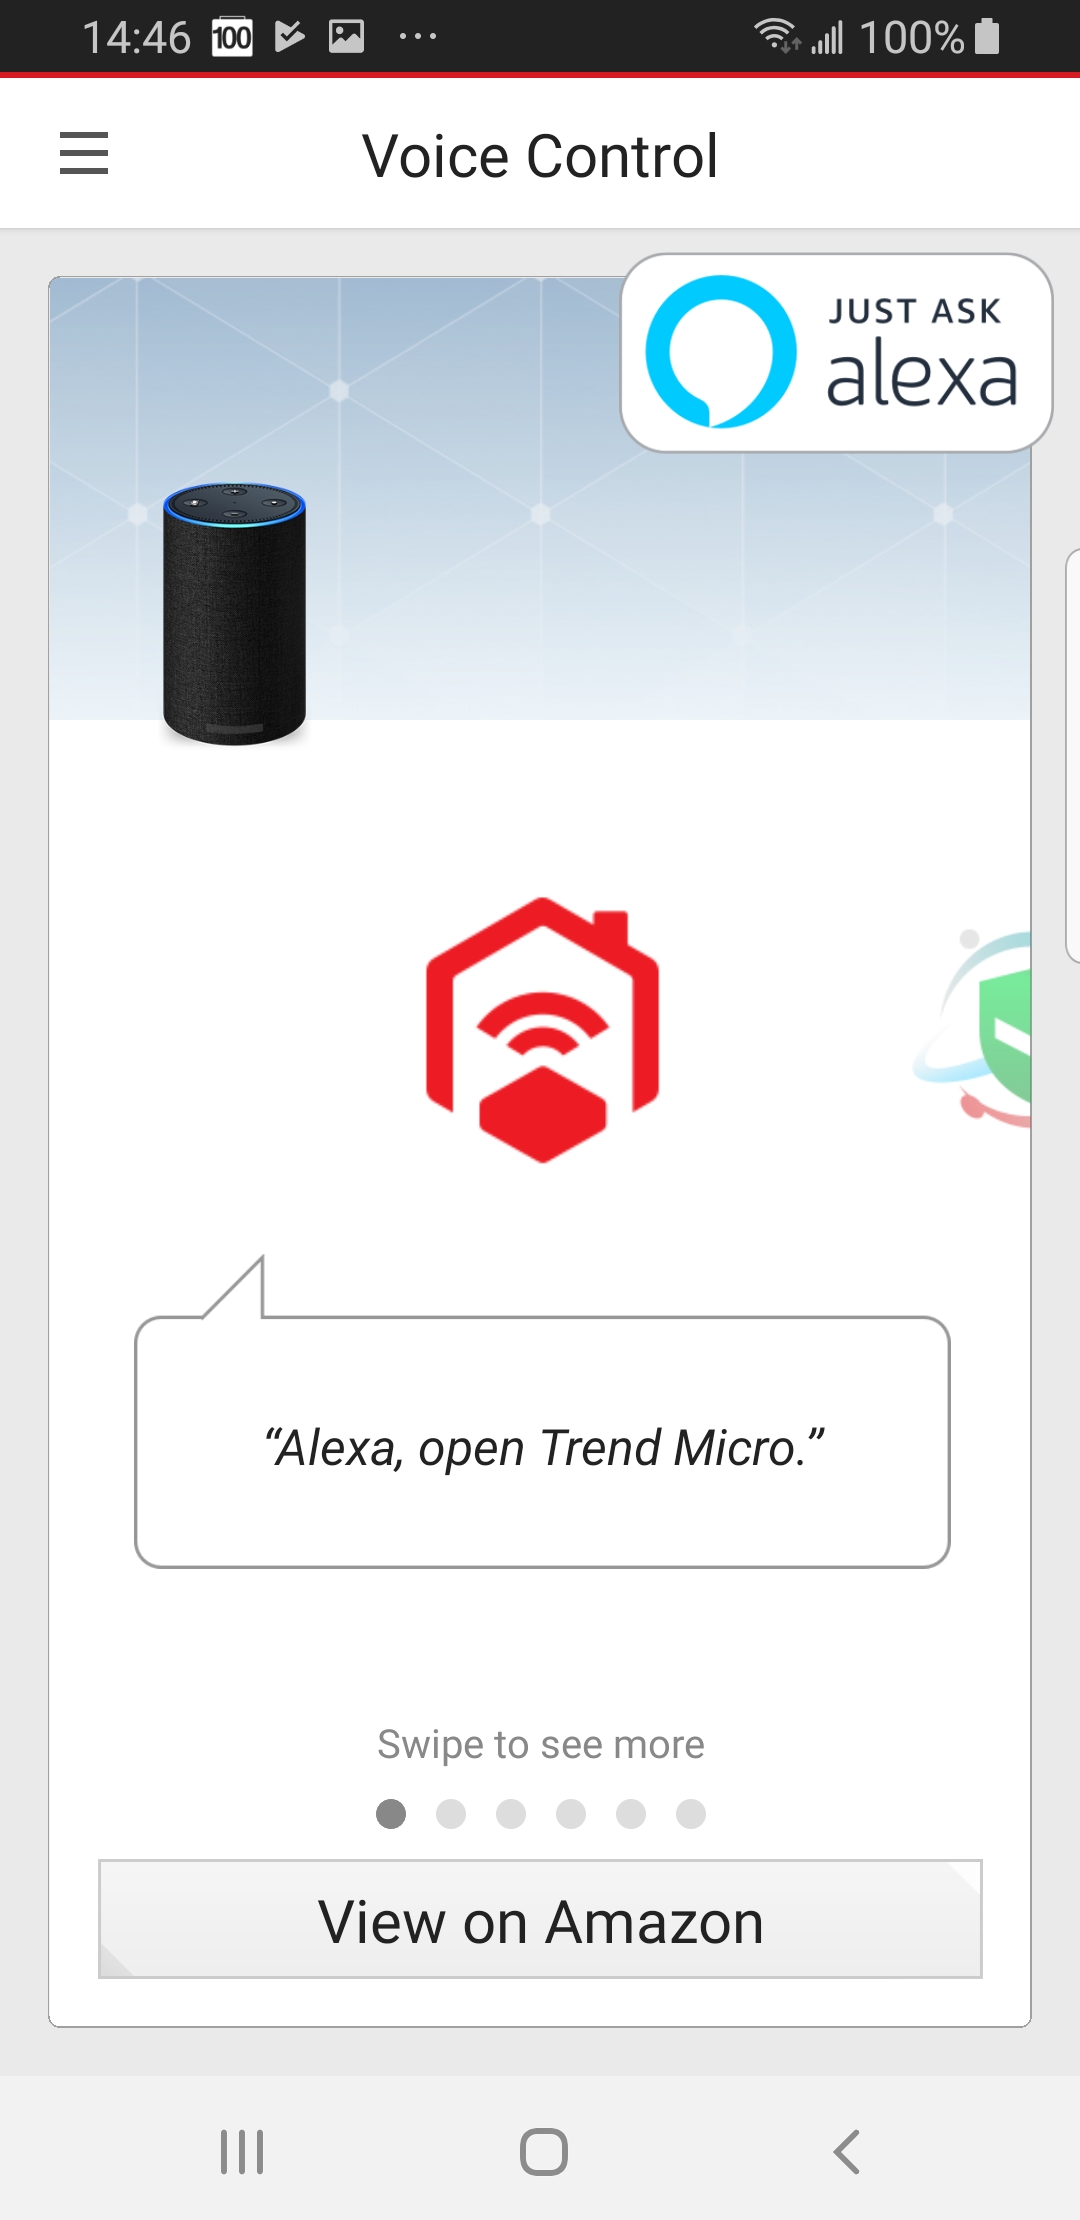 Open Trend Micro Home Network Security using Alexa